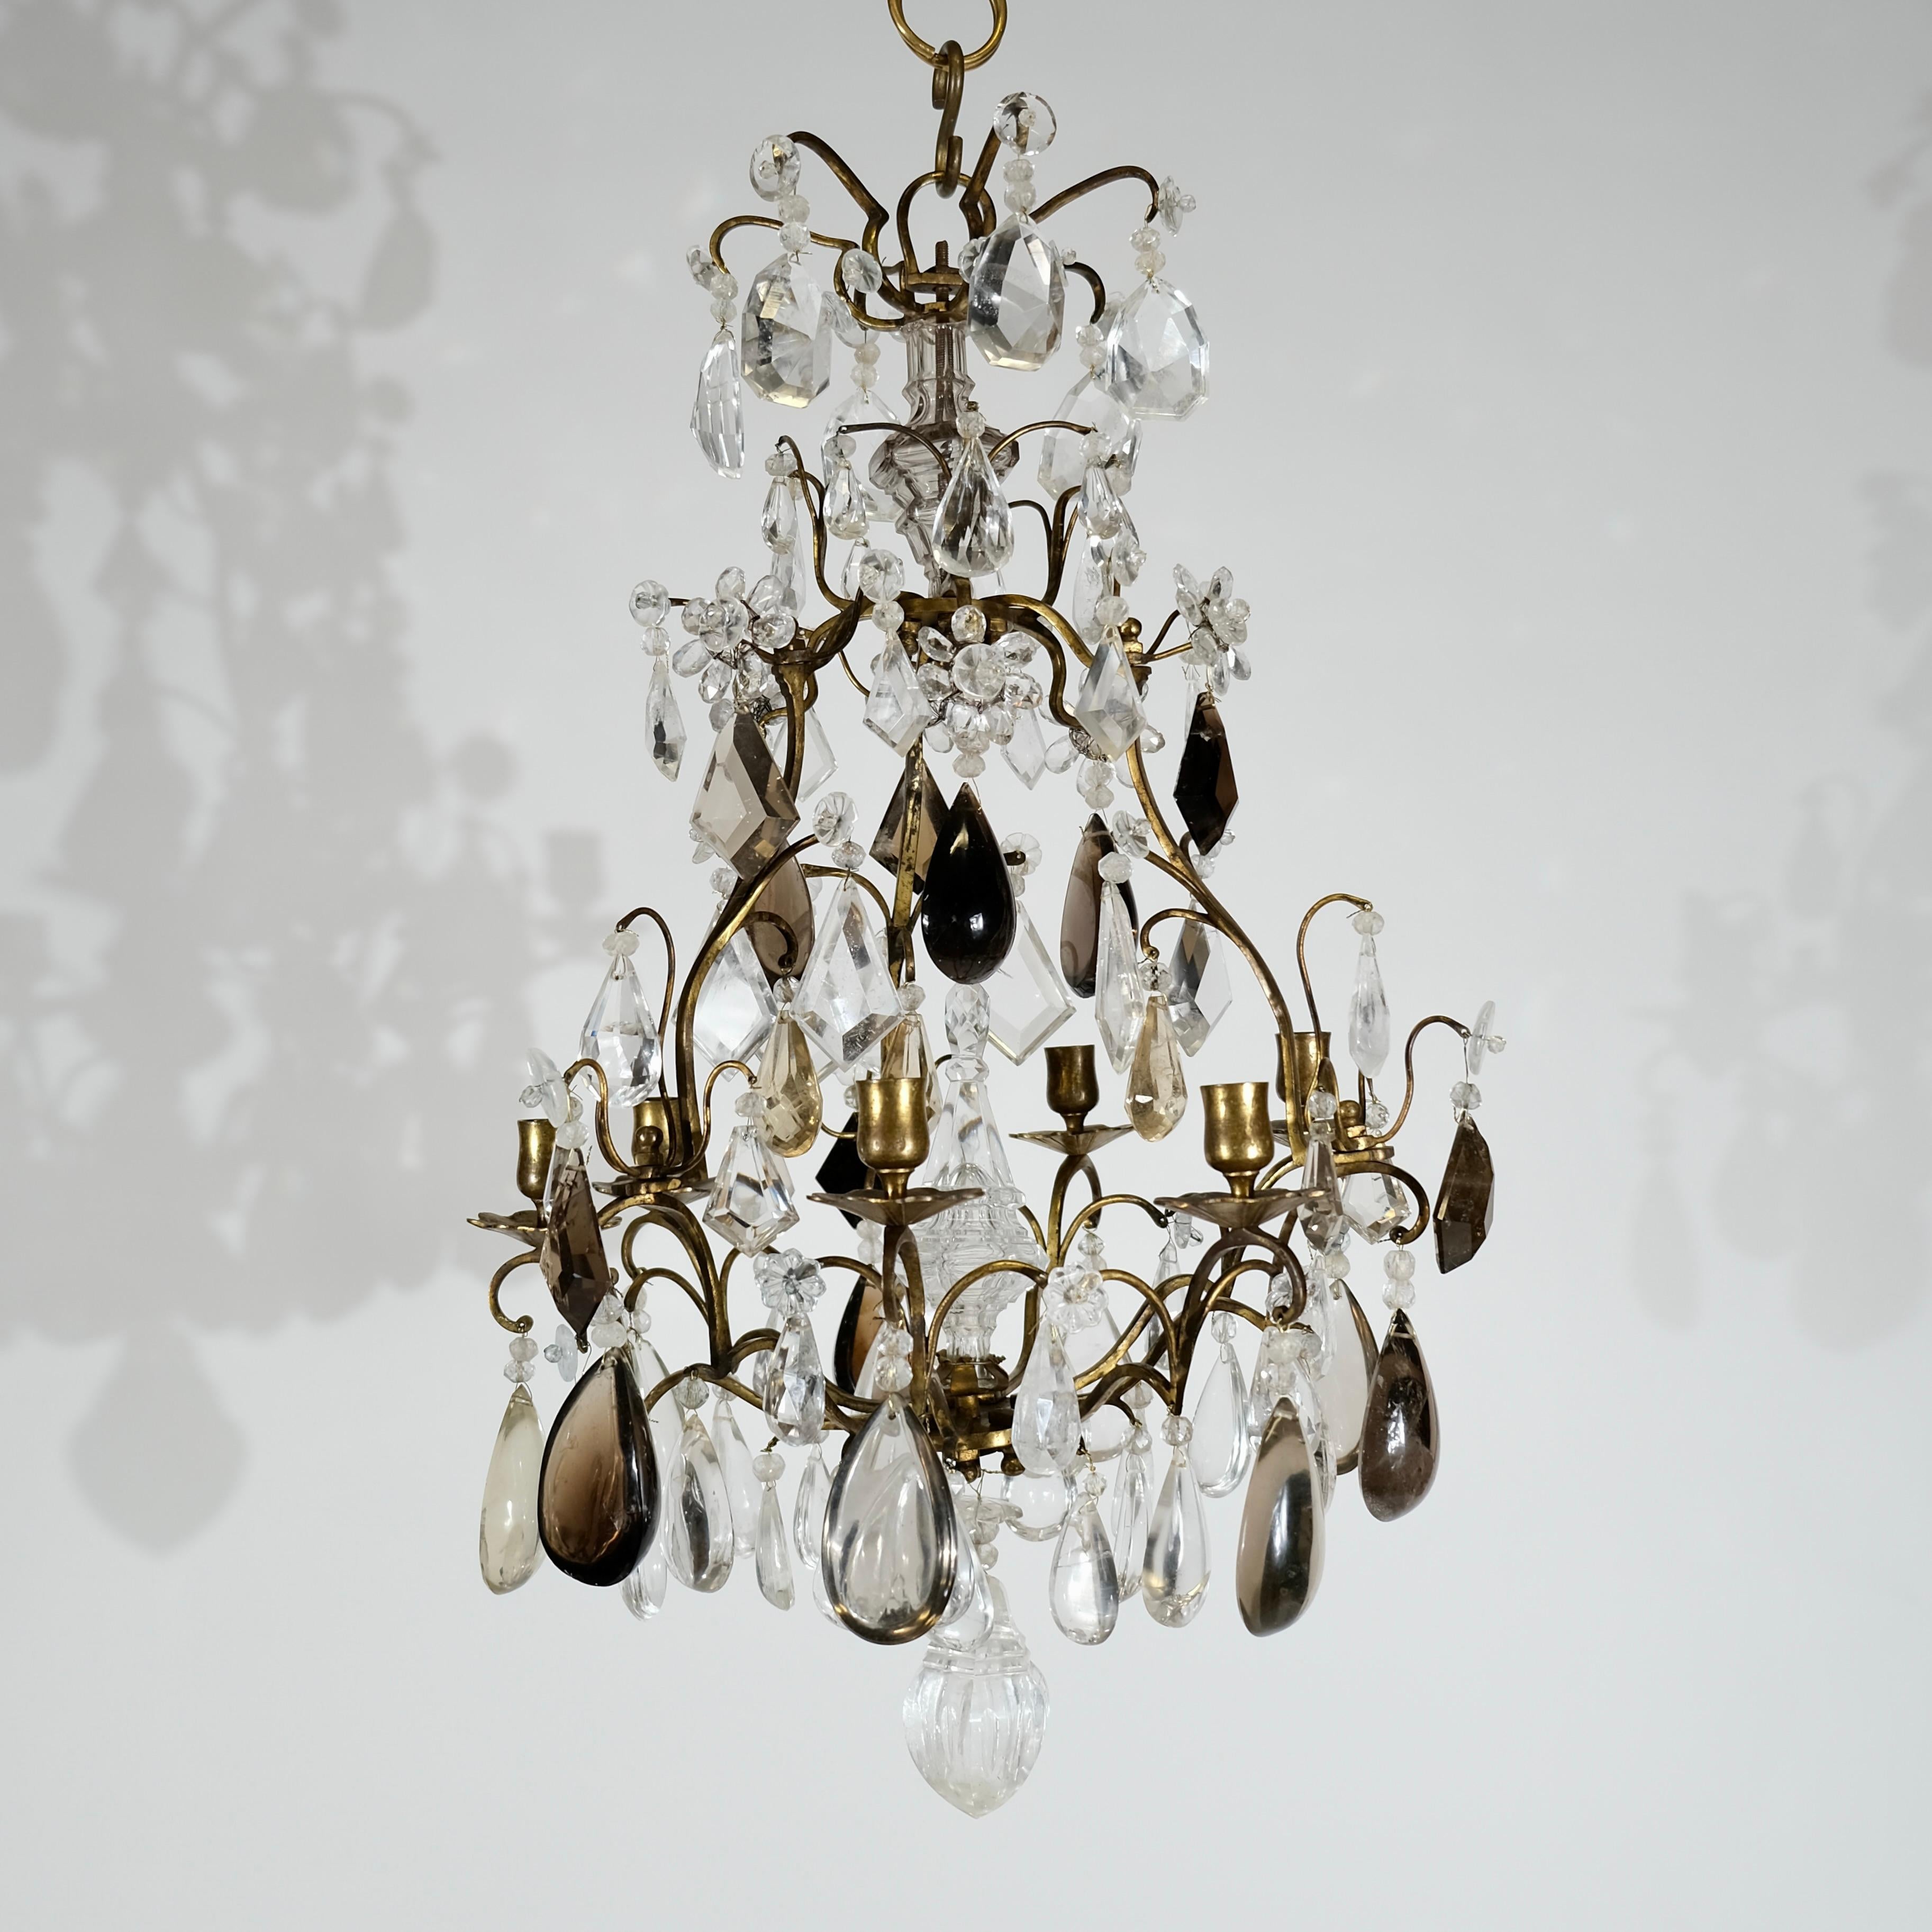 Baroque-style chandelier, adorned with breathtaking rock crystals and smoked topazes. This opulent masterpiece seamlessly blends the lavish aesthetics of the Baroque era with the sparkling allure of genuine rock crystals.
The chandelier is